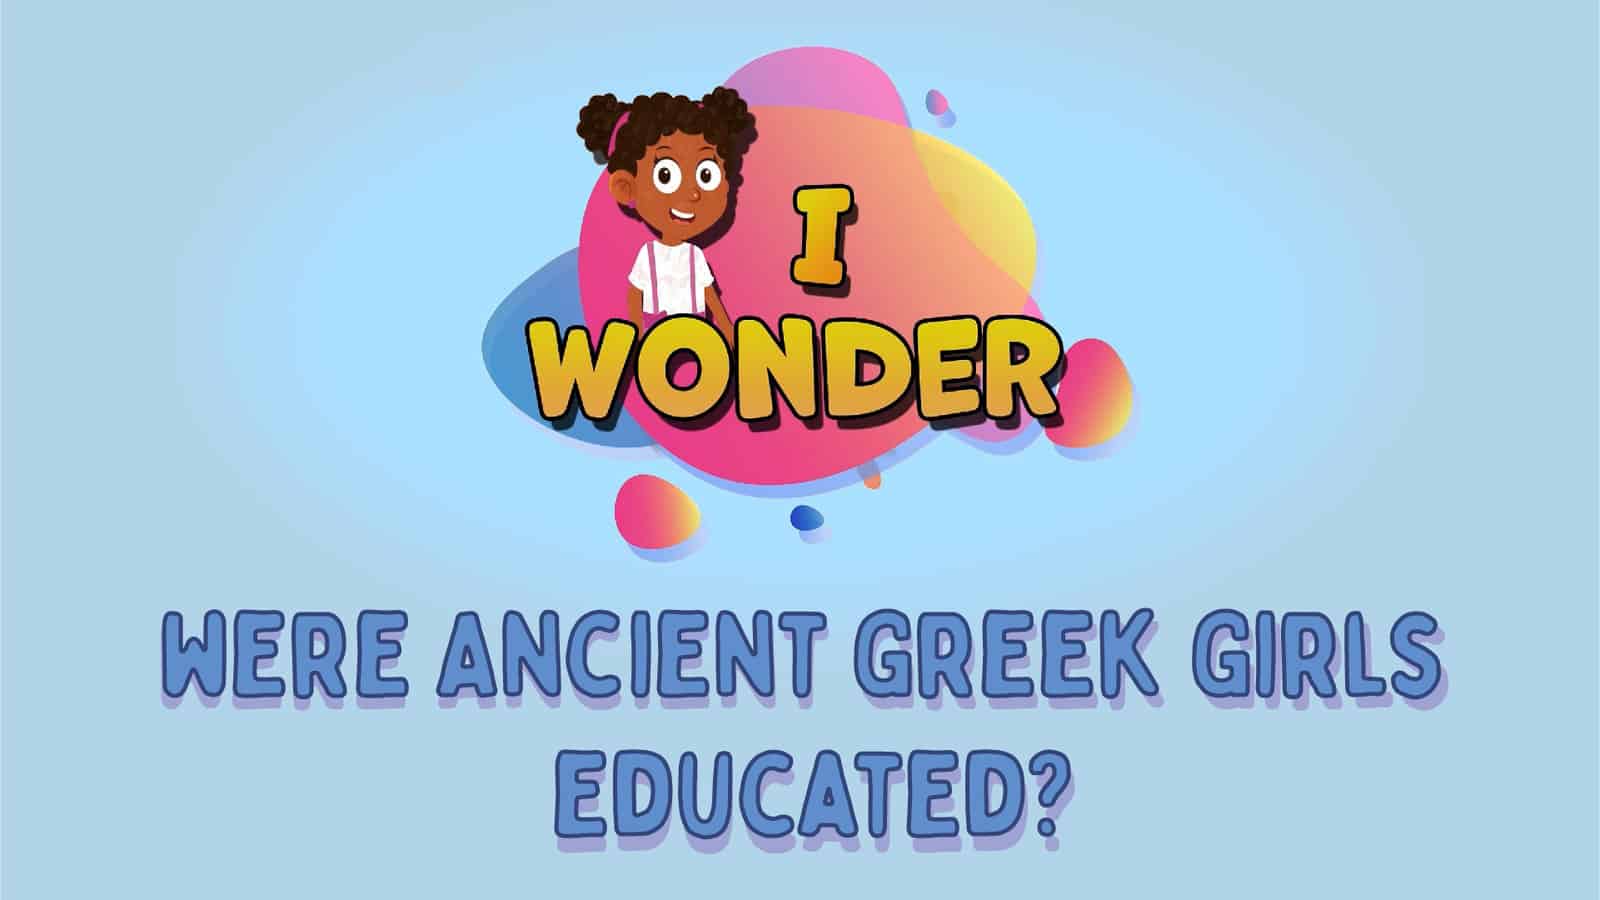 Were Ancient Greek Girls Educated?